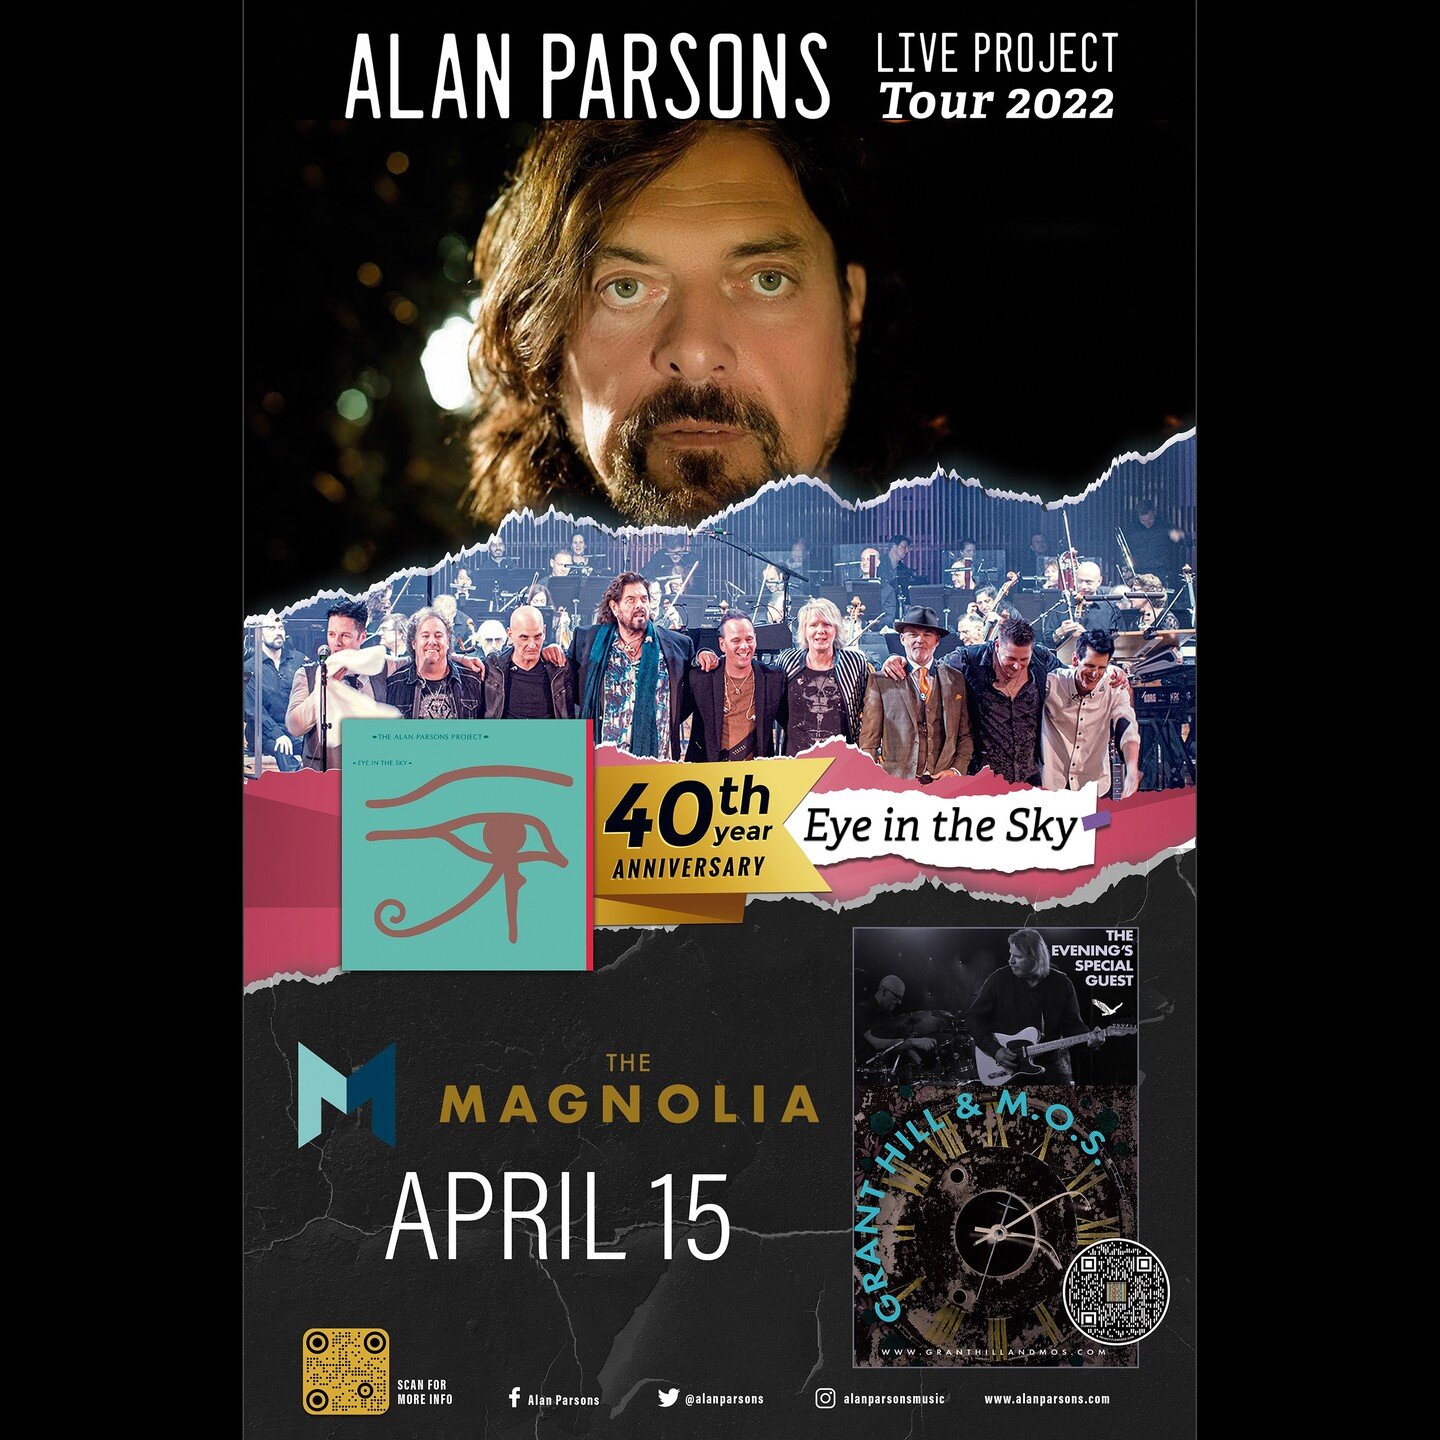 TOMORROW
ALAN PARSONS LIVE PROJECT TOUR 2022 AT THE MAGNOLIA
OPENING ACT GRANT HILL &amp; M.O.S.
Friday&mdash;APRIL 15
ADVANCE TICKETS AT https://concerts.livenation.com/the-alan-parsons-live-project-el-cajon-california-04-15-2022/event/0B005C24BCDE1